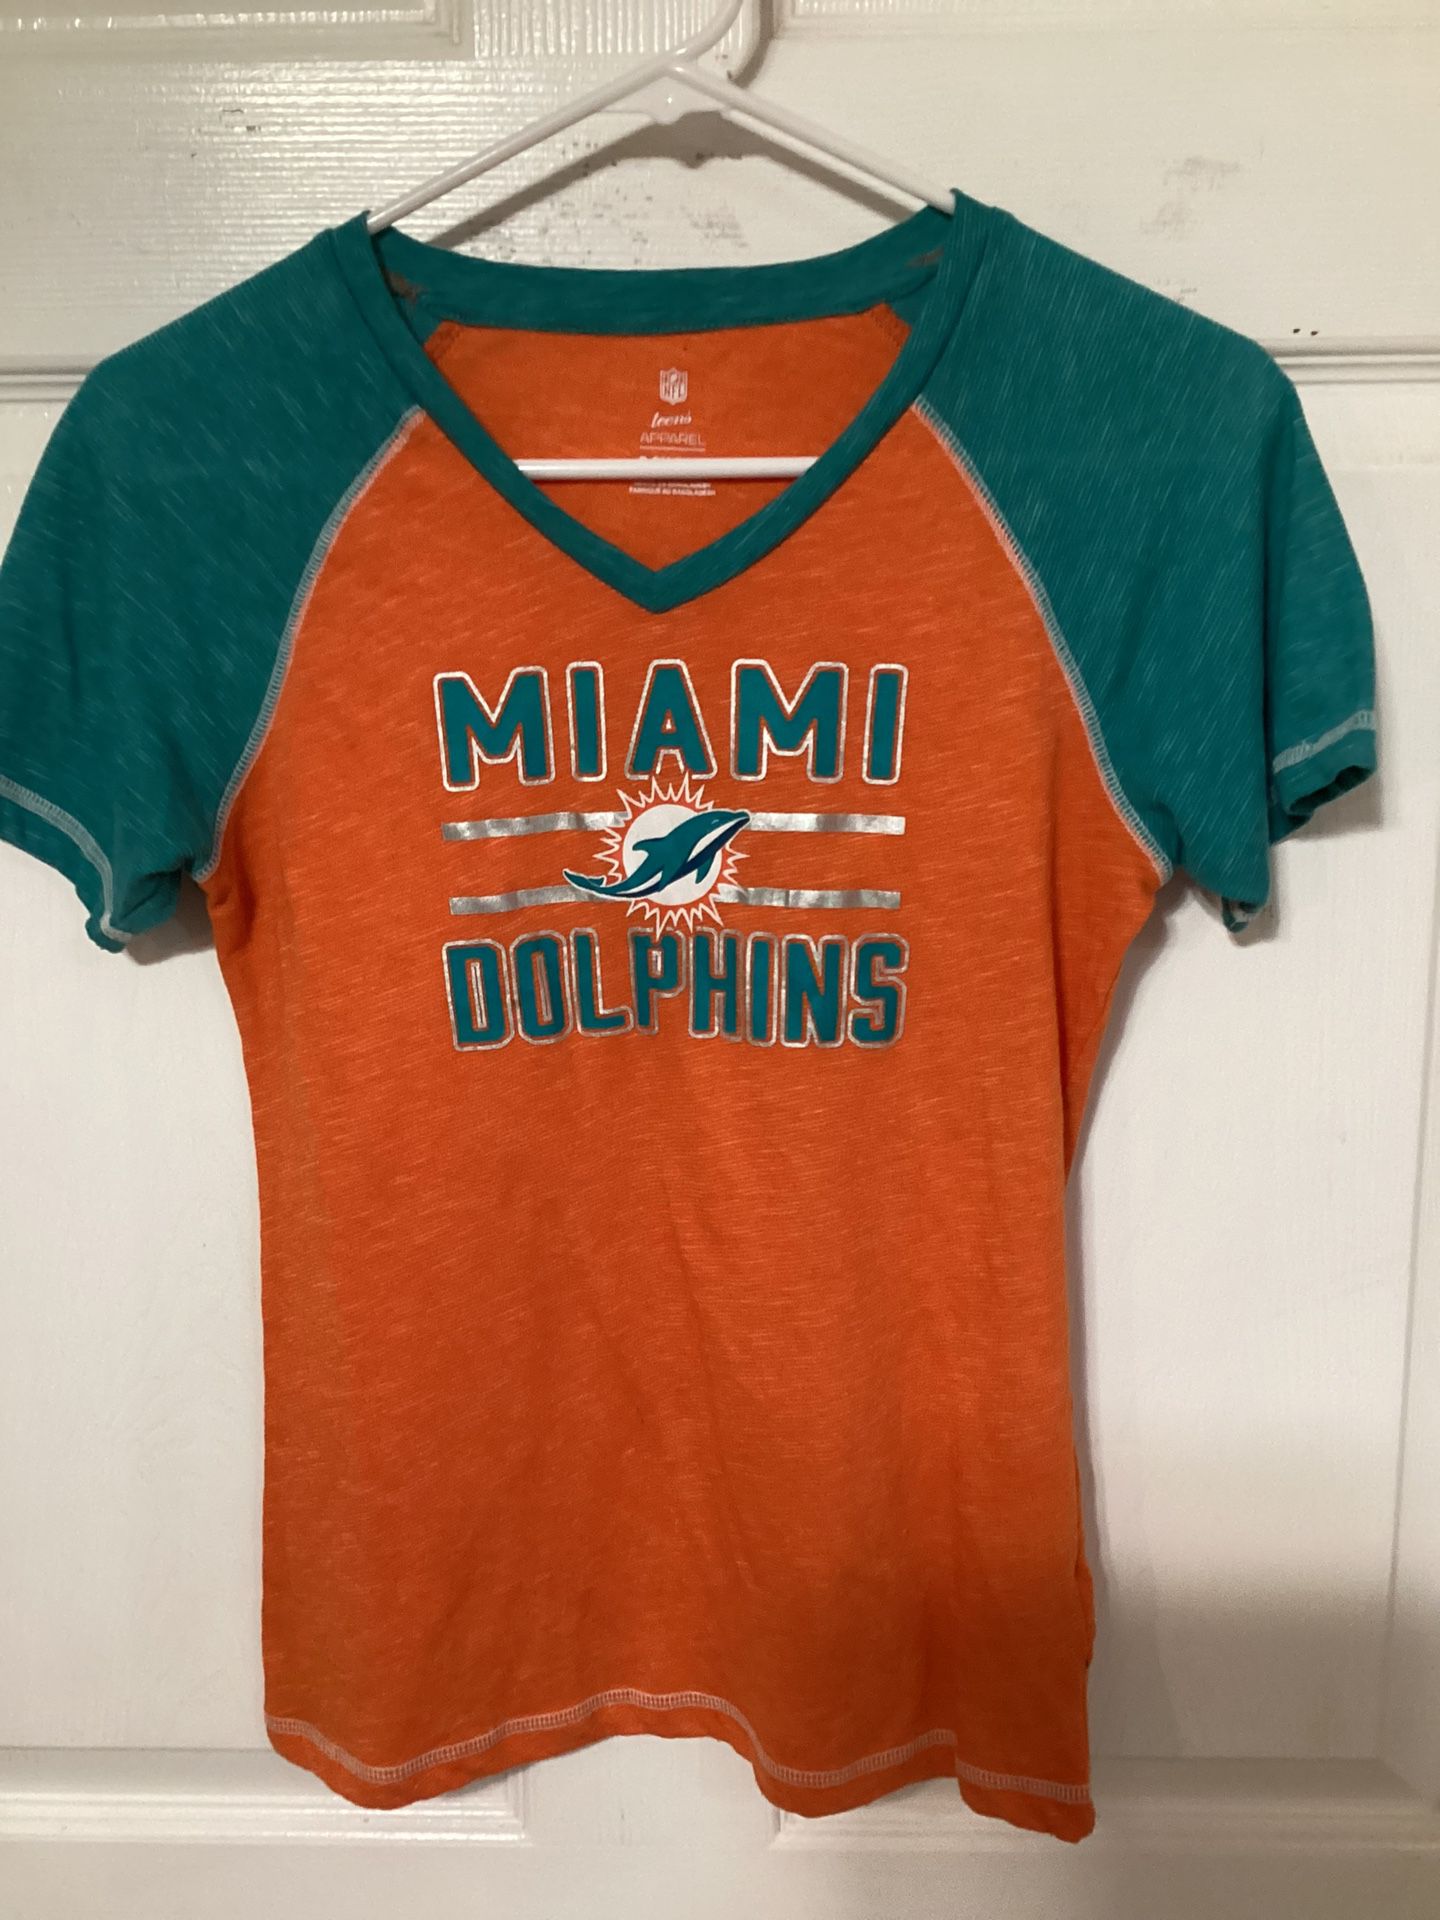  NFL Apparel -  Miami Dolphins Sleeve Tee - Size 3-5 Juniors Small 